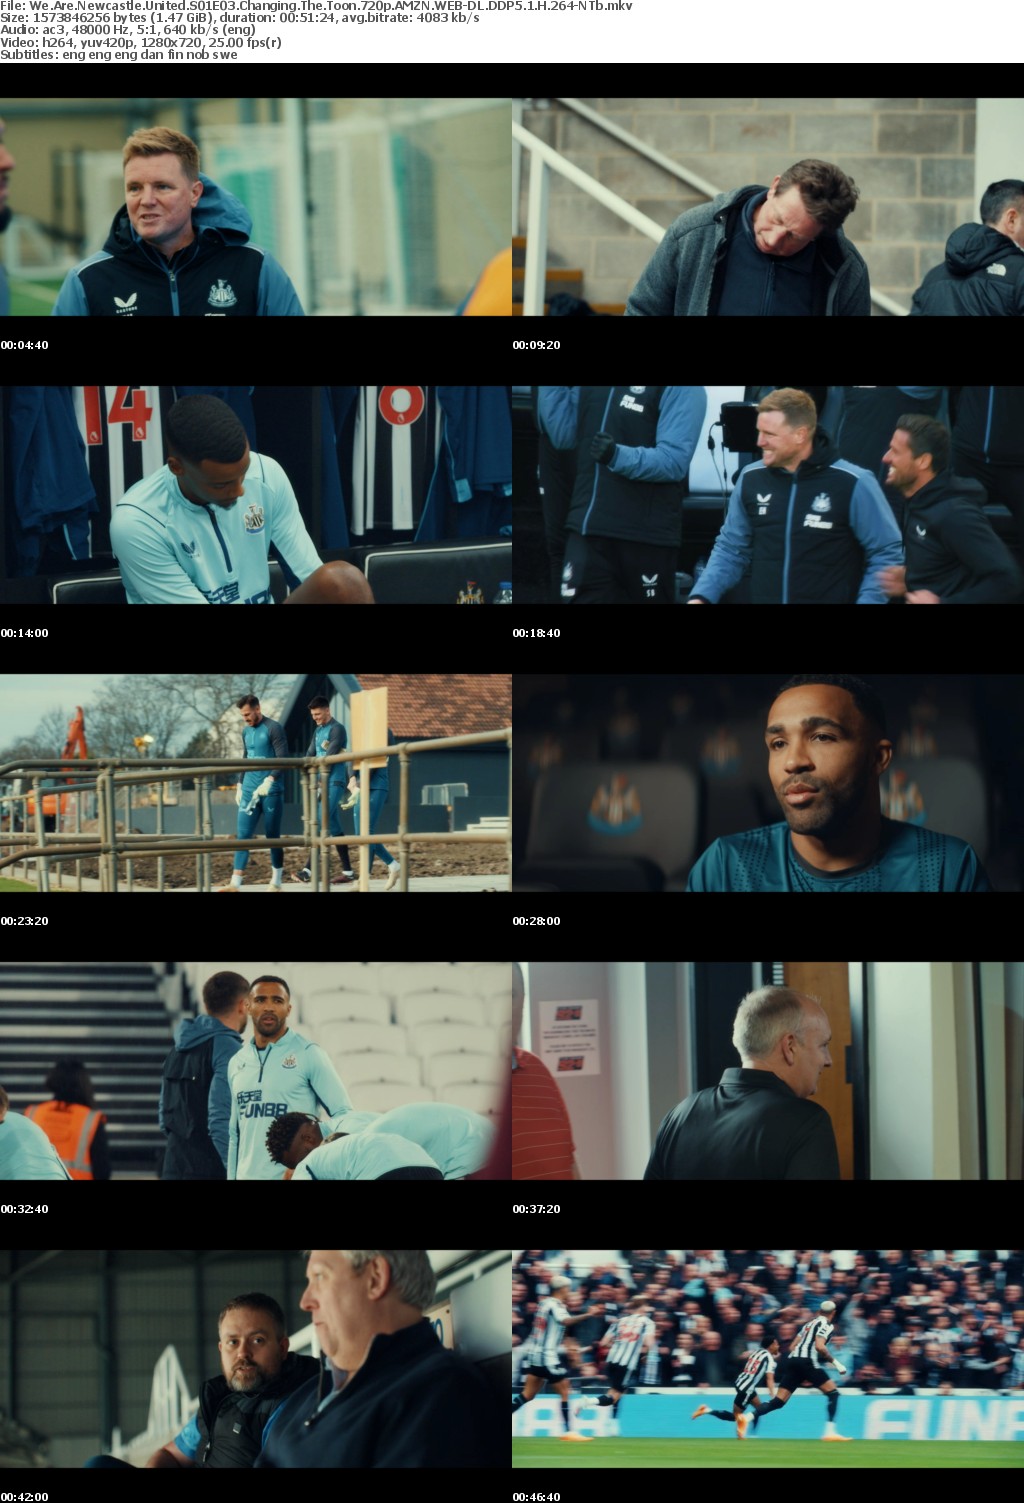 We Are Newcastle United S01E03 Changing The Toon 720p AMZN WEB-DL DDP5 1 H 264-NTb